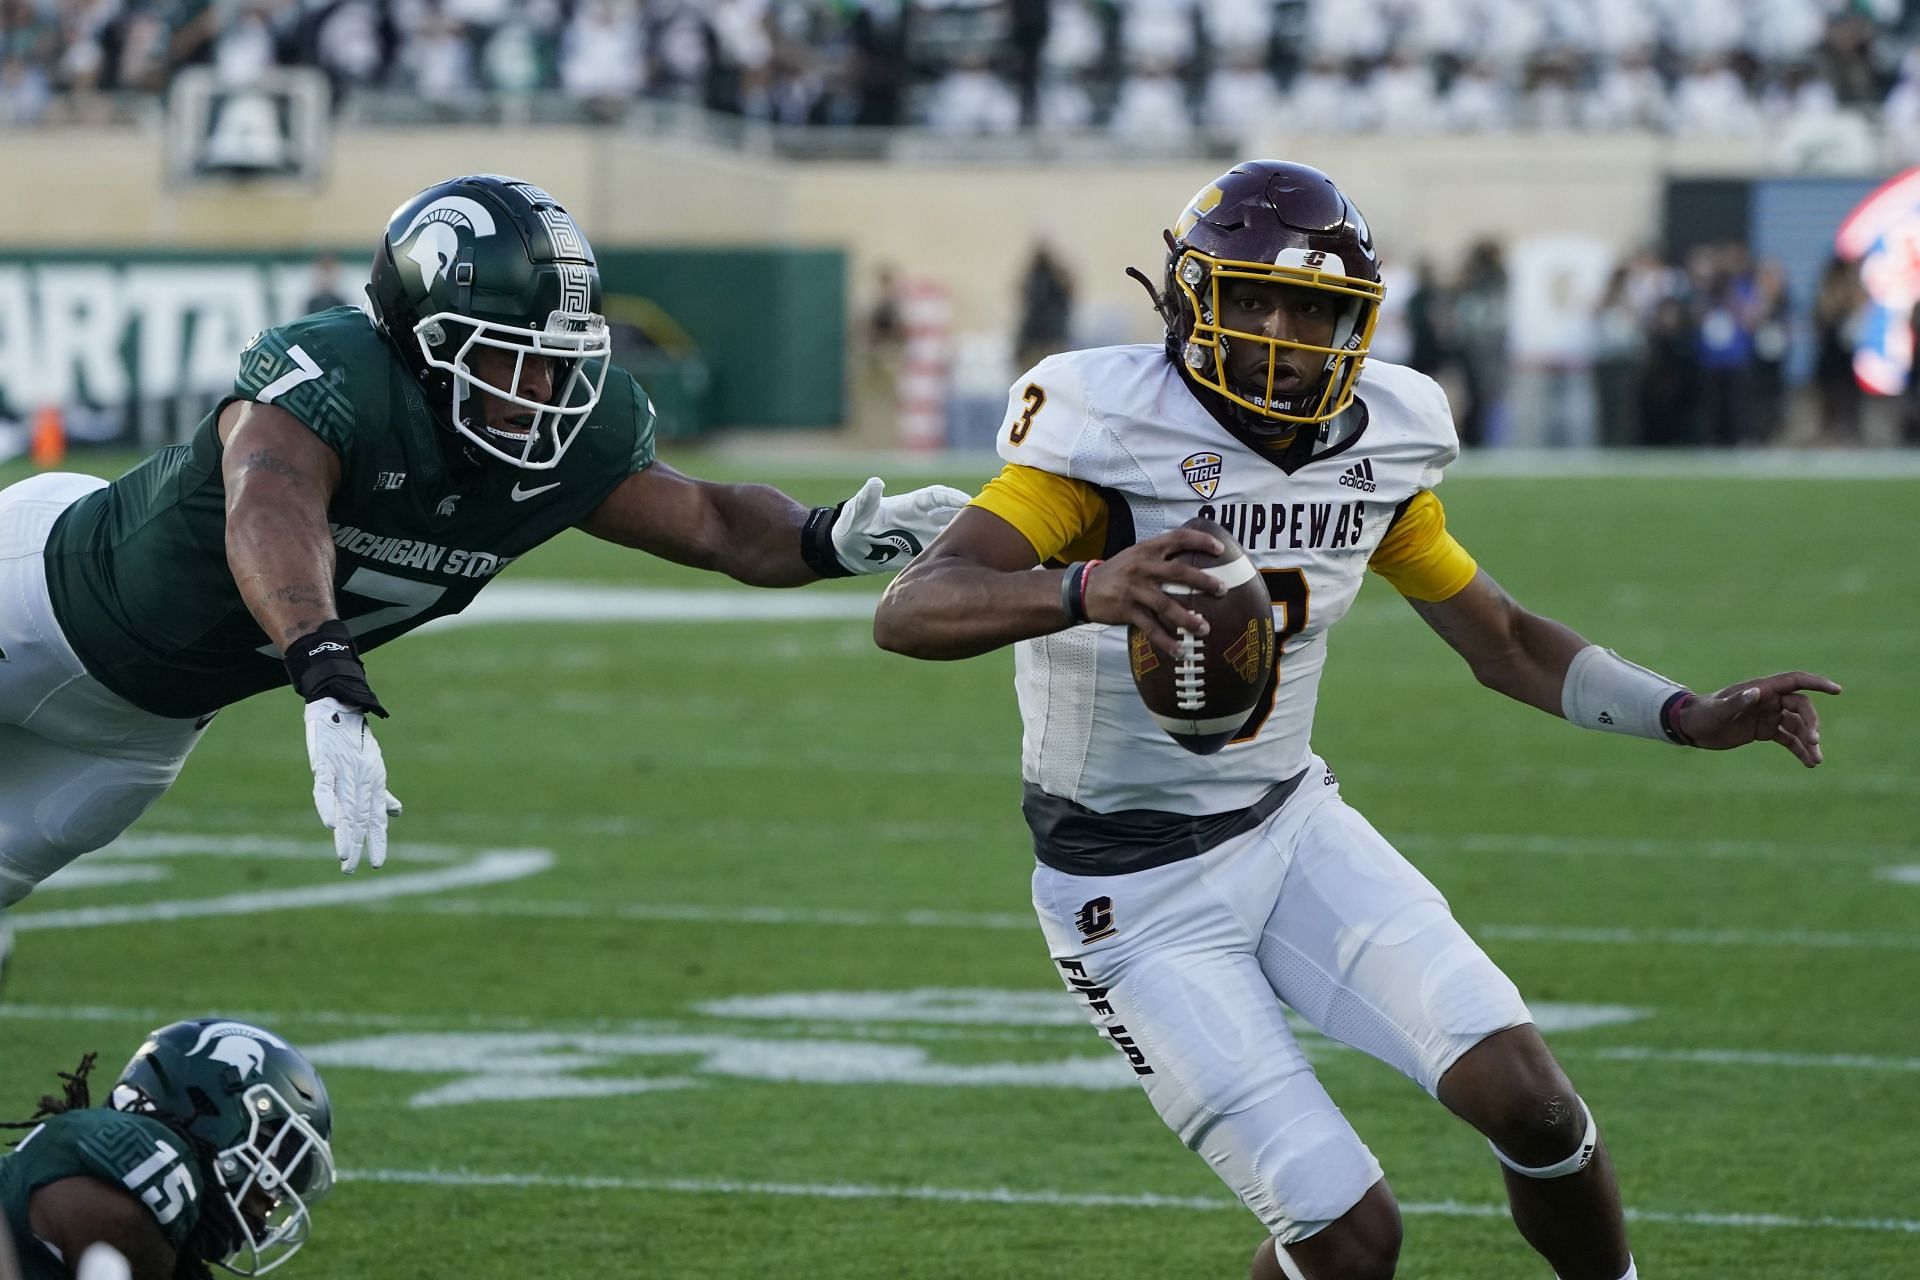 How to Watch the Central Michigan vs. Notre Dame Game: Streaming